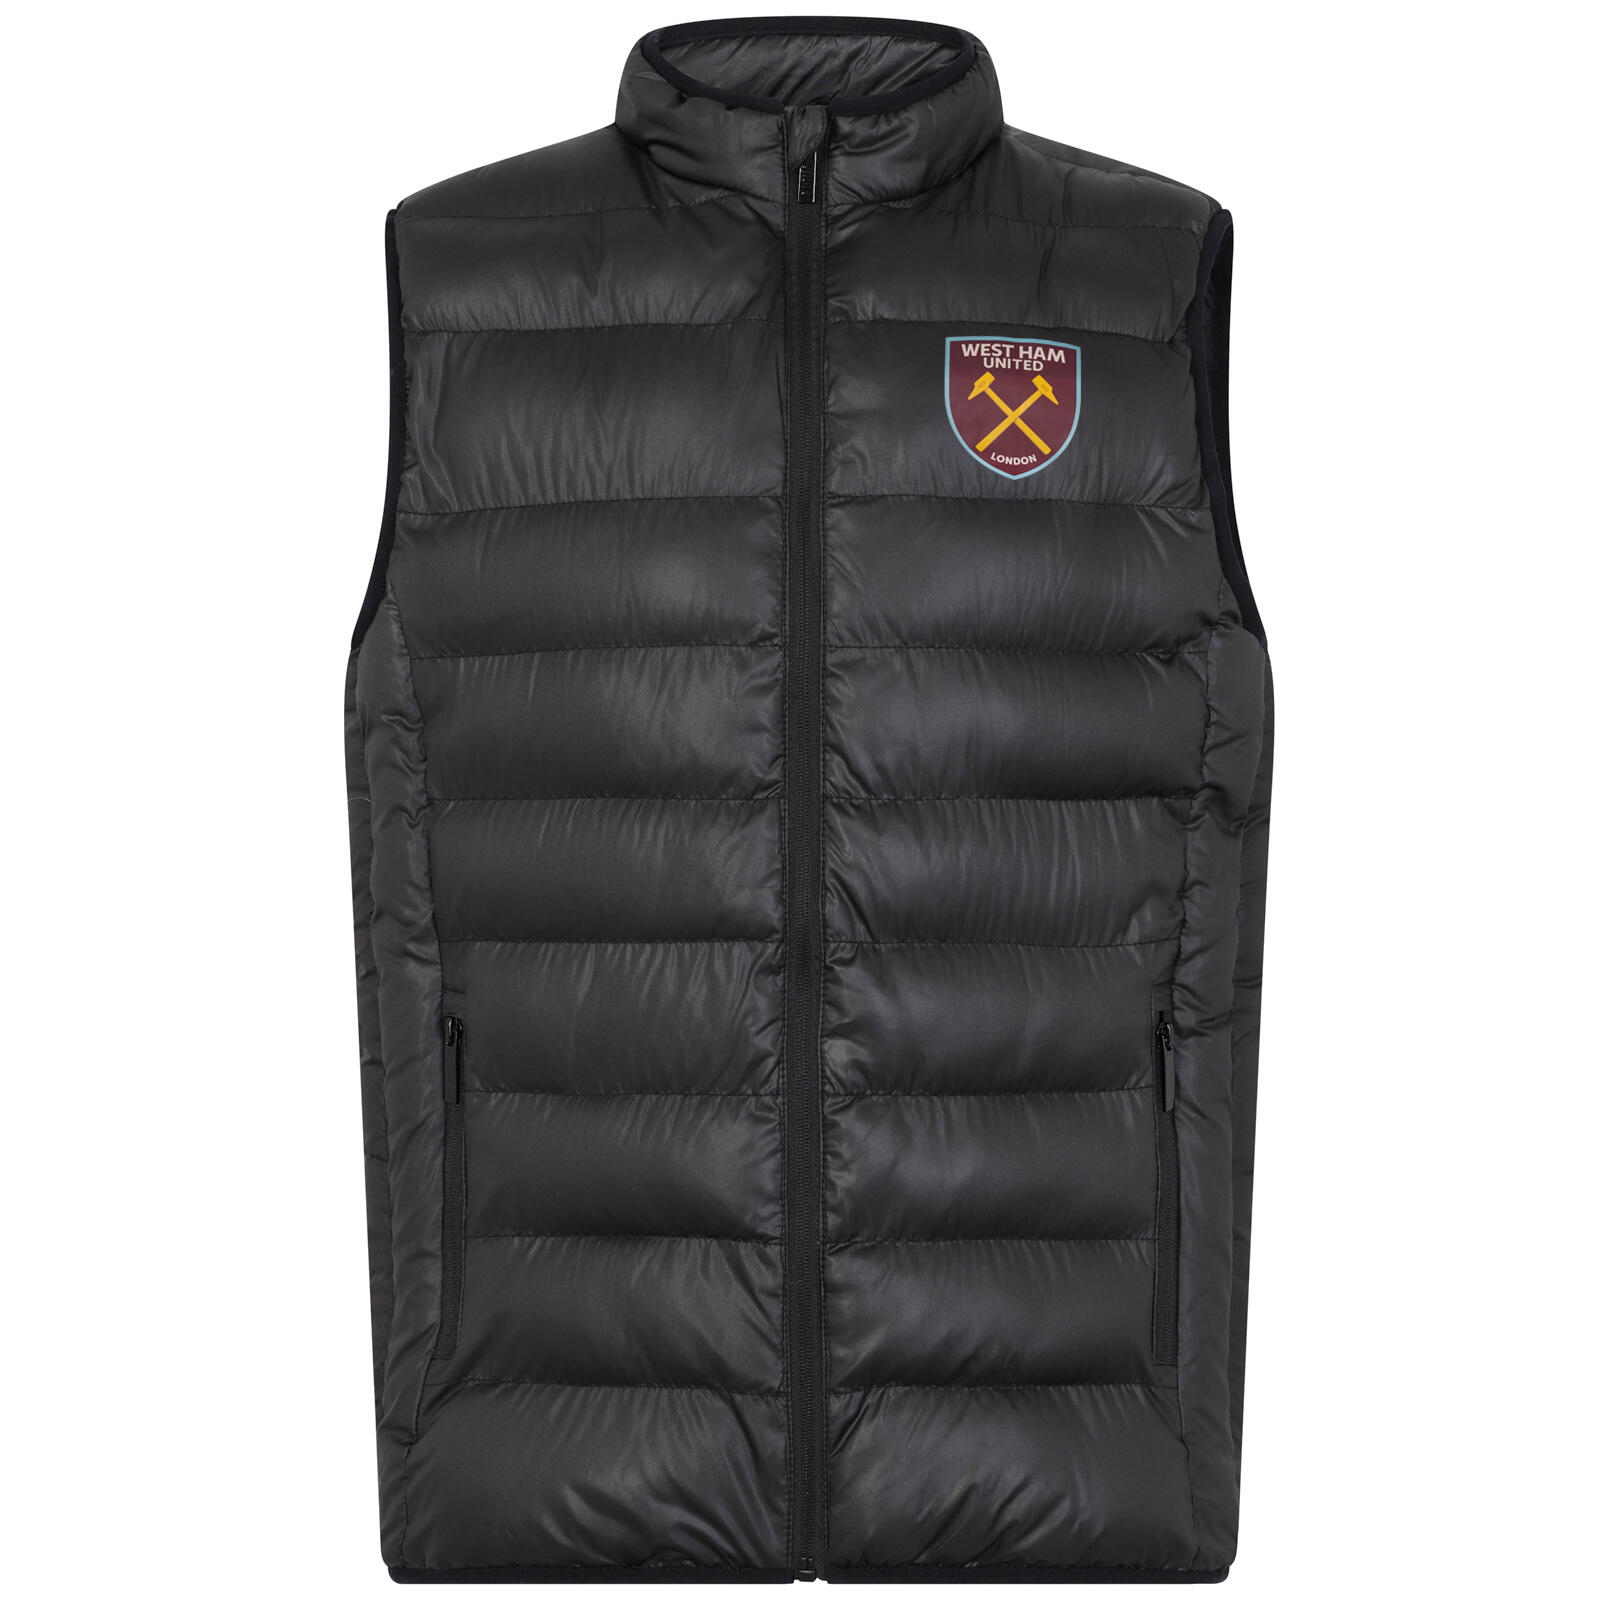 West Ham United Mens Gilet Jacket Body Warmer Padded OFFICIAL Football Gift 1/4